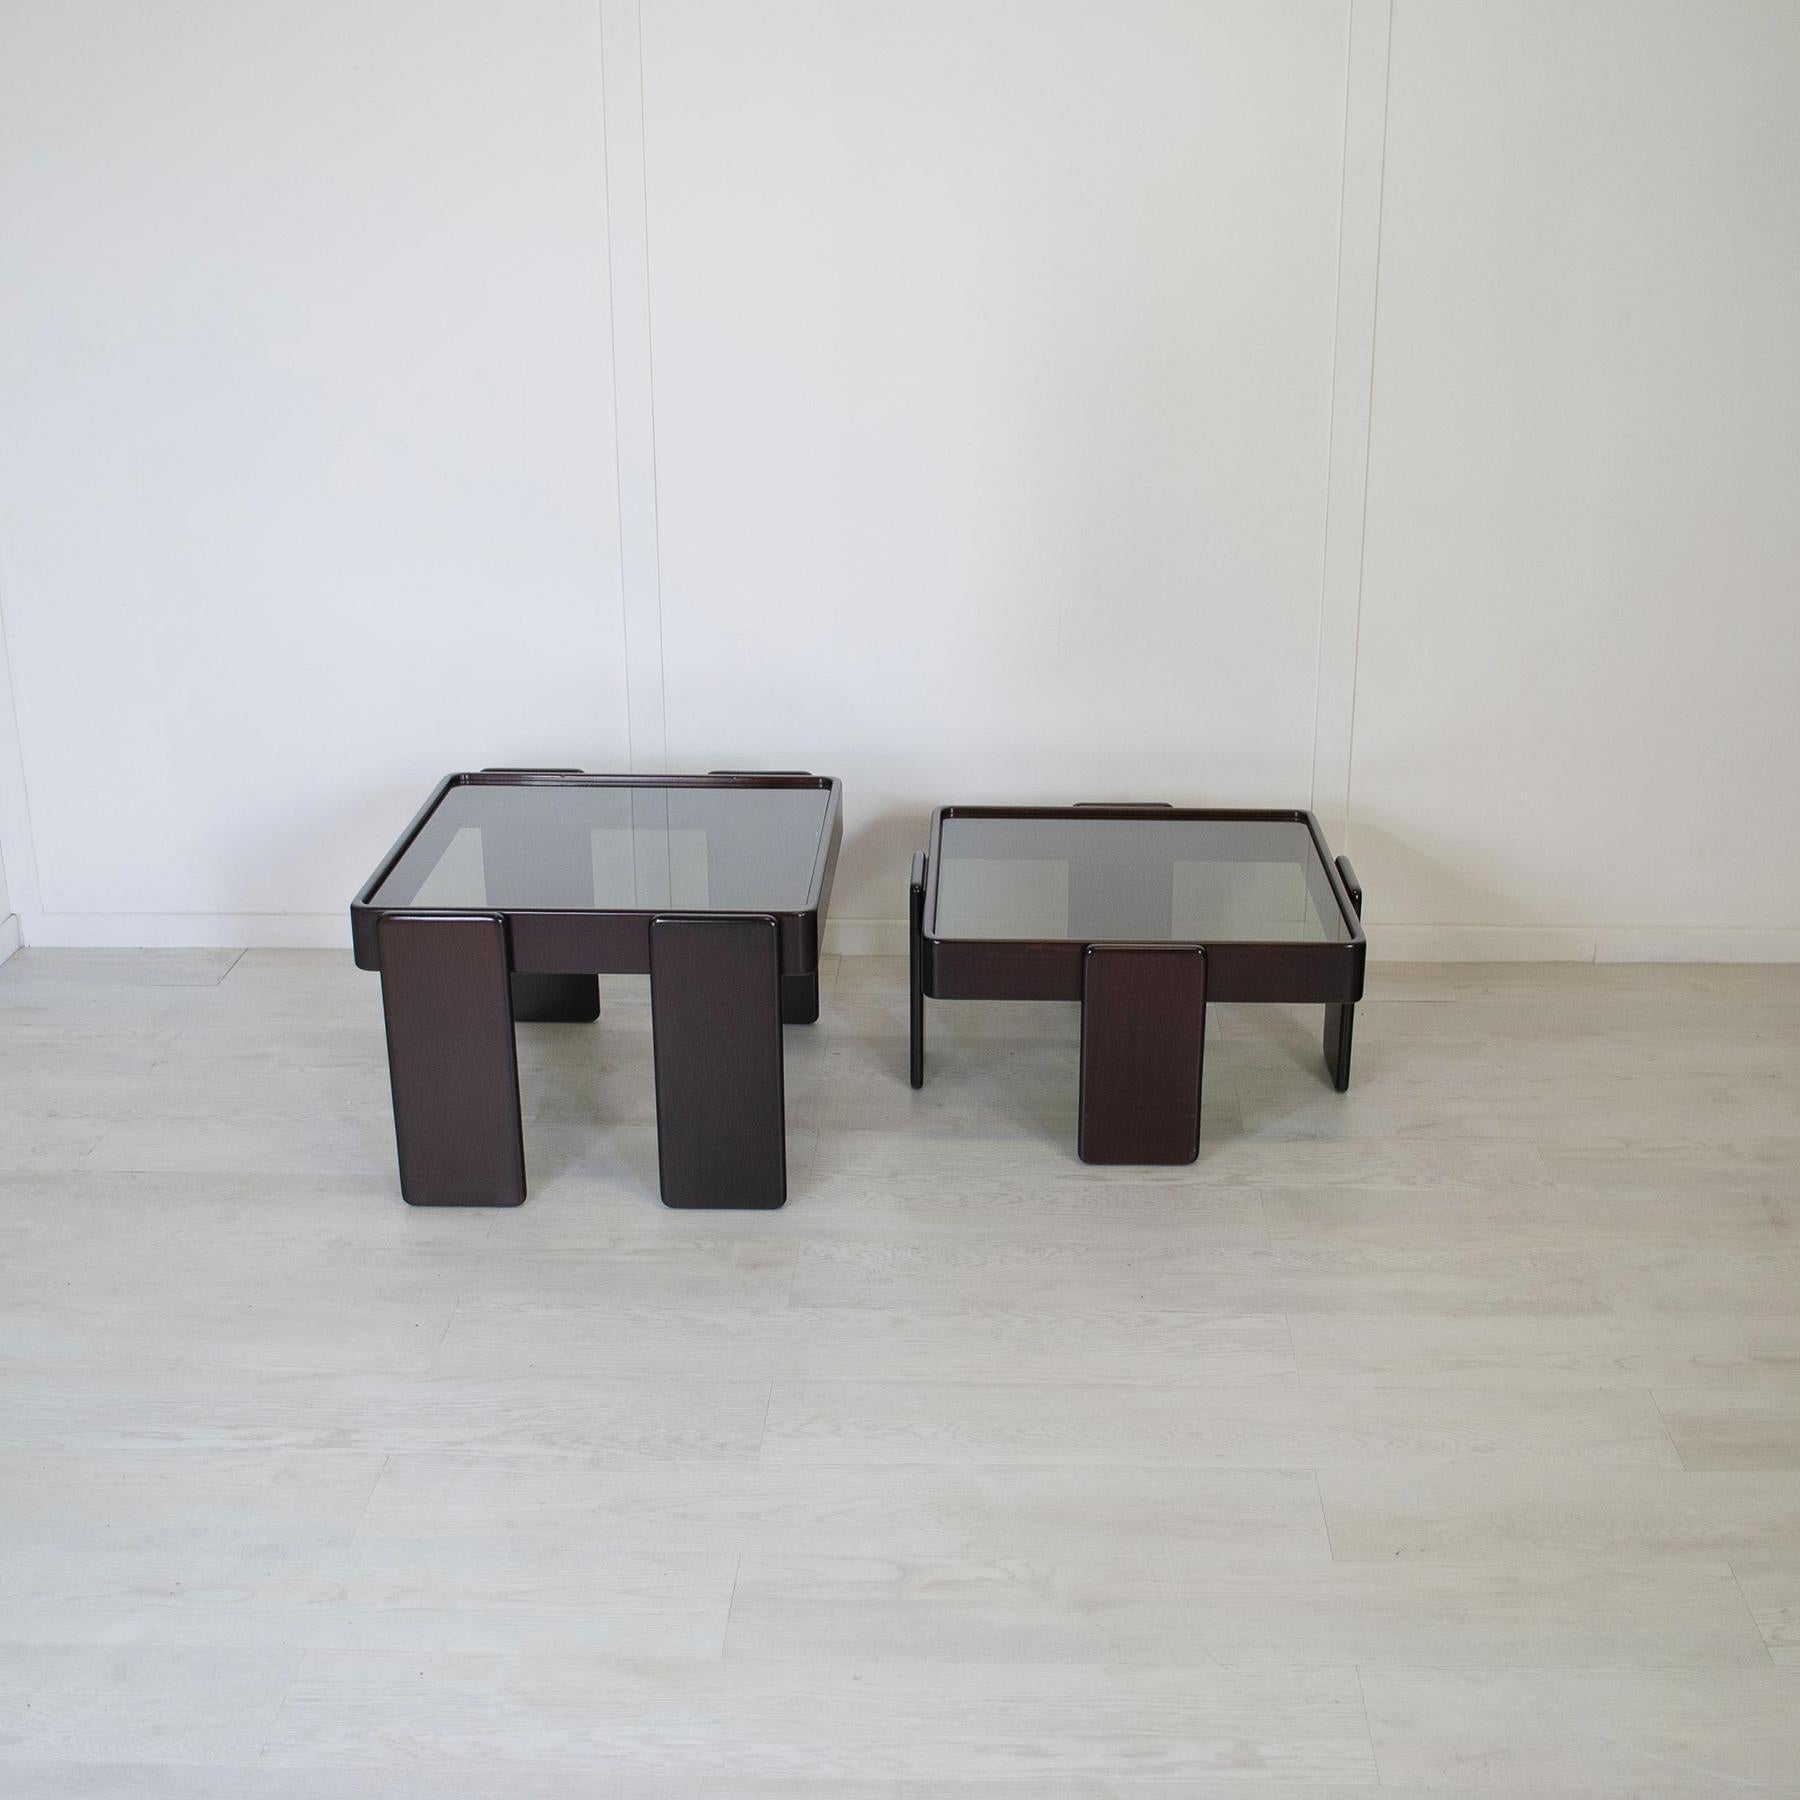 Set of two stackable dark brown lacquered wood coffee tables in perfect condition in its original lacquering, designer Gianfranco Frattini for Cassina mid-1960s production.

small table measurements L 58 D 58 H 30 cm